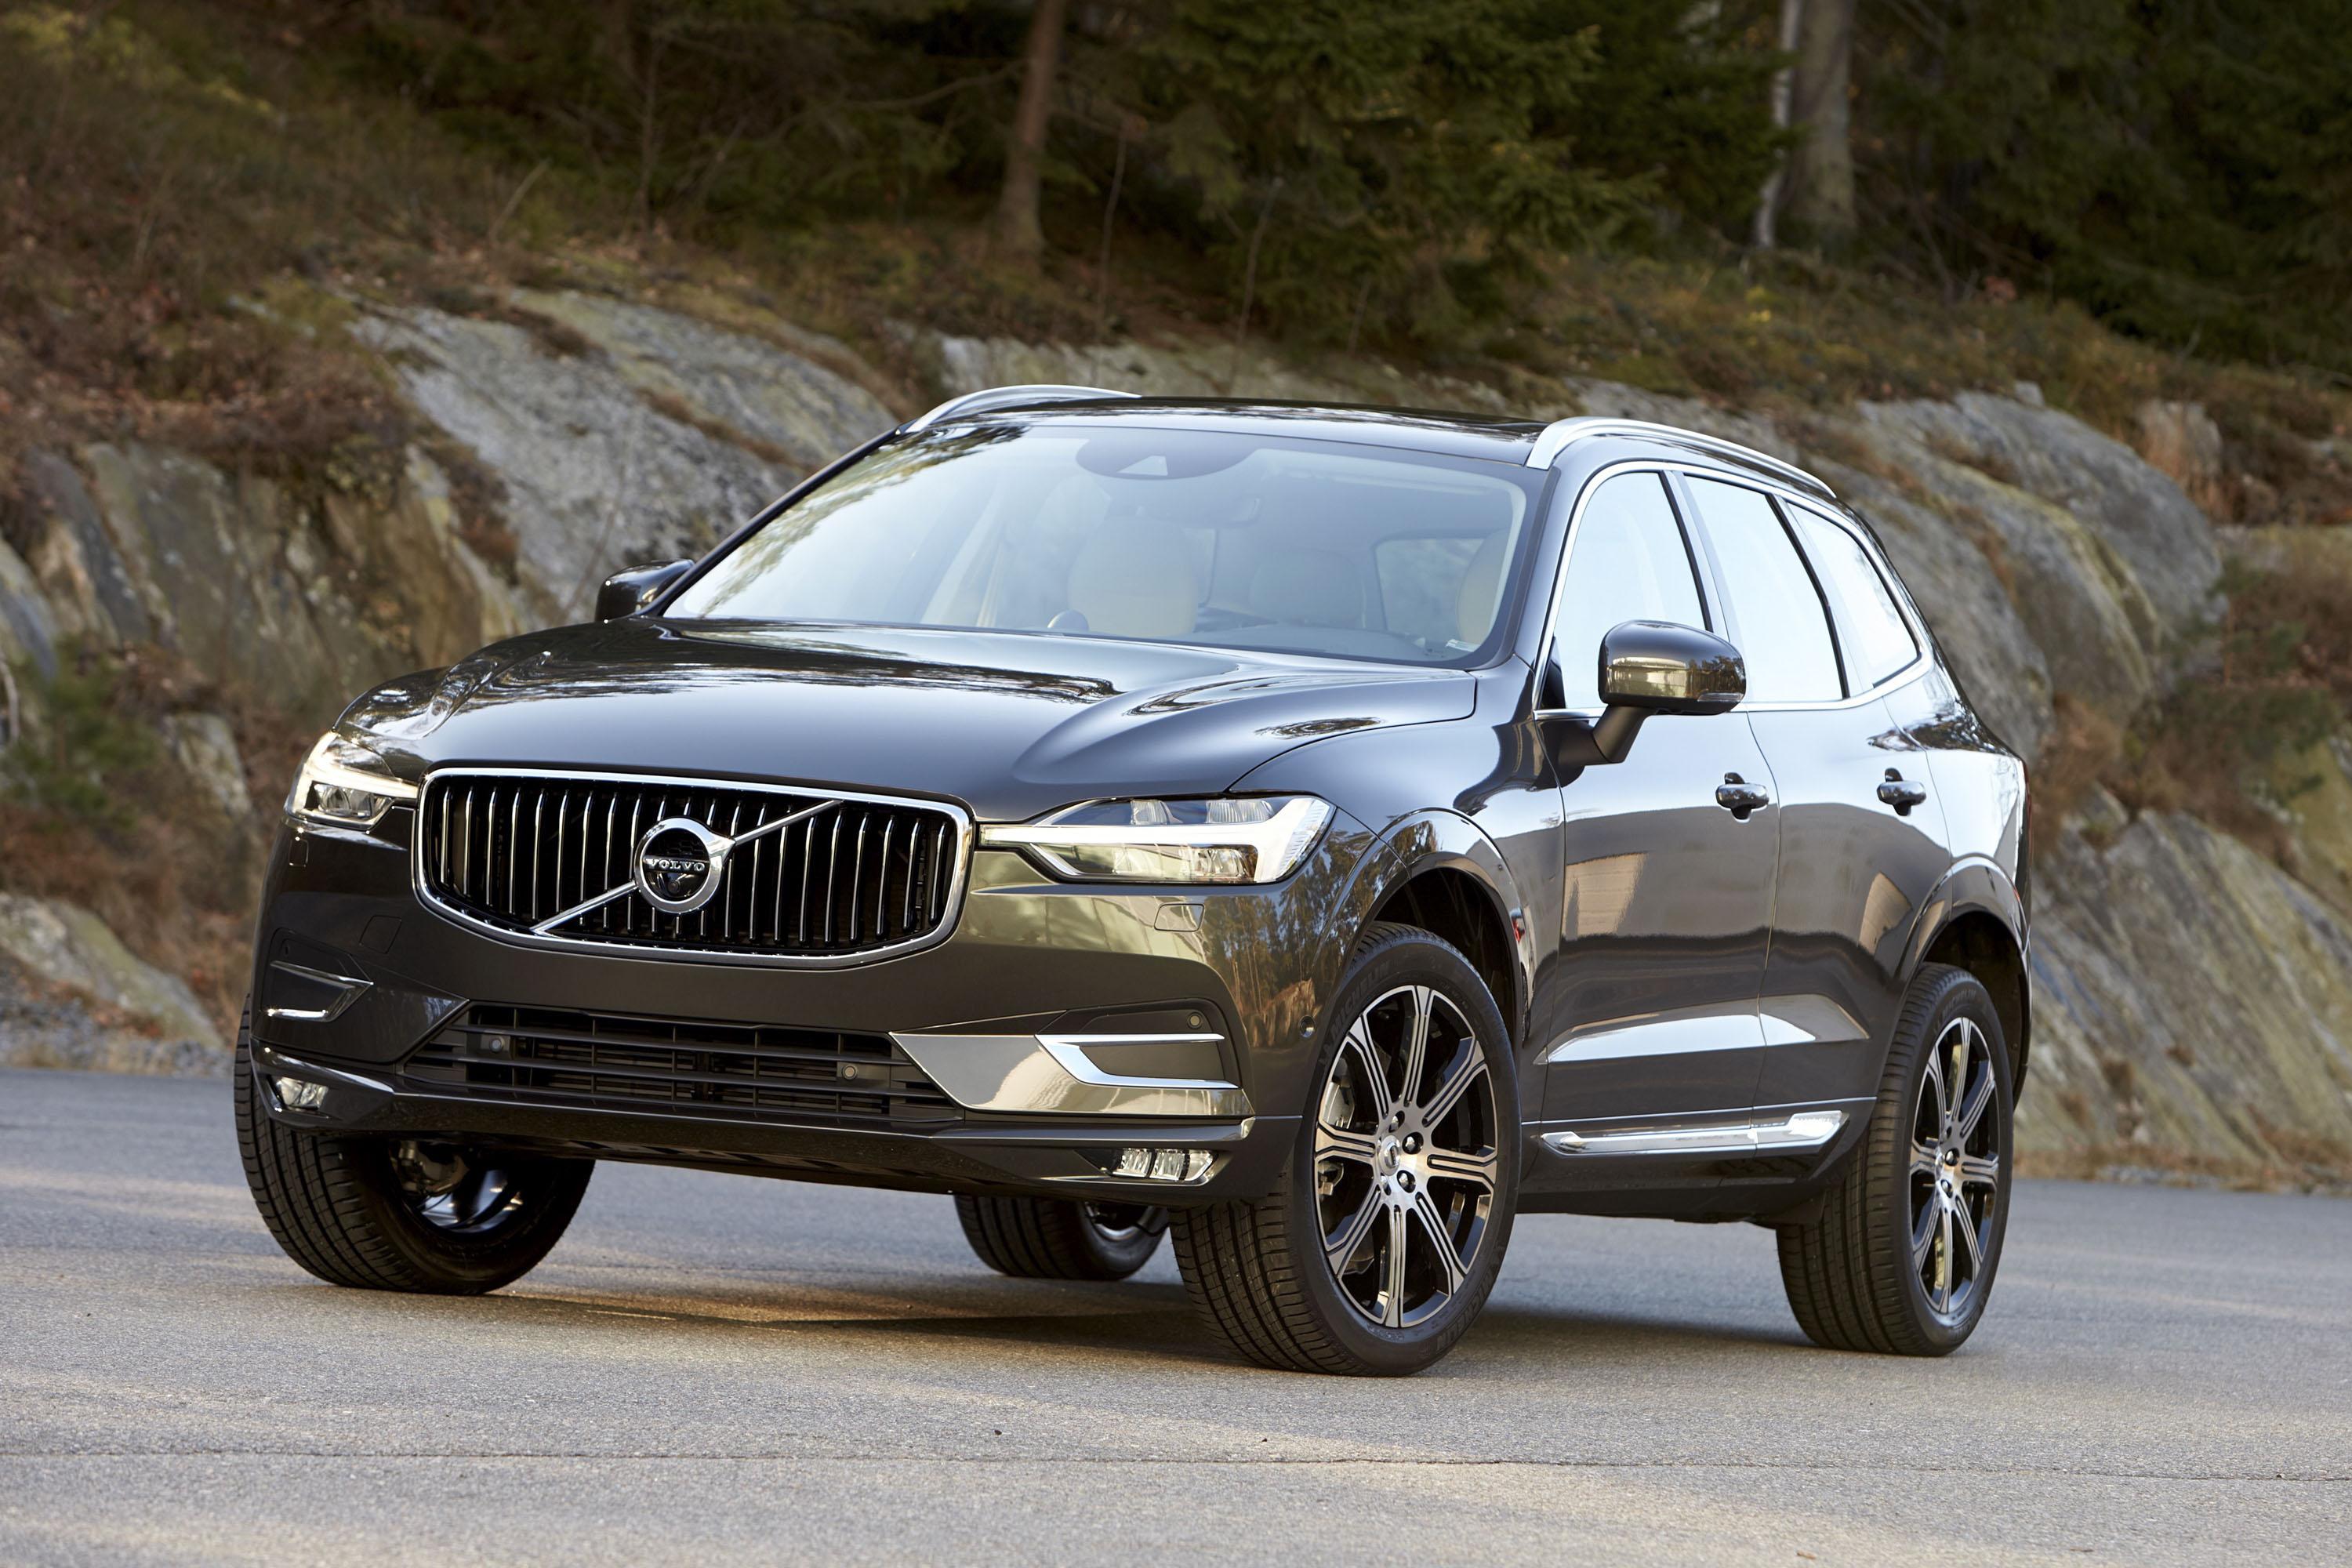 Wallpaper Of The Day: 2018 Volvo XC60